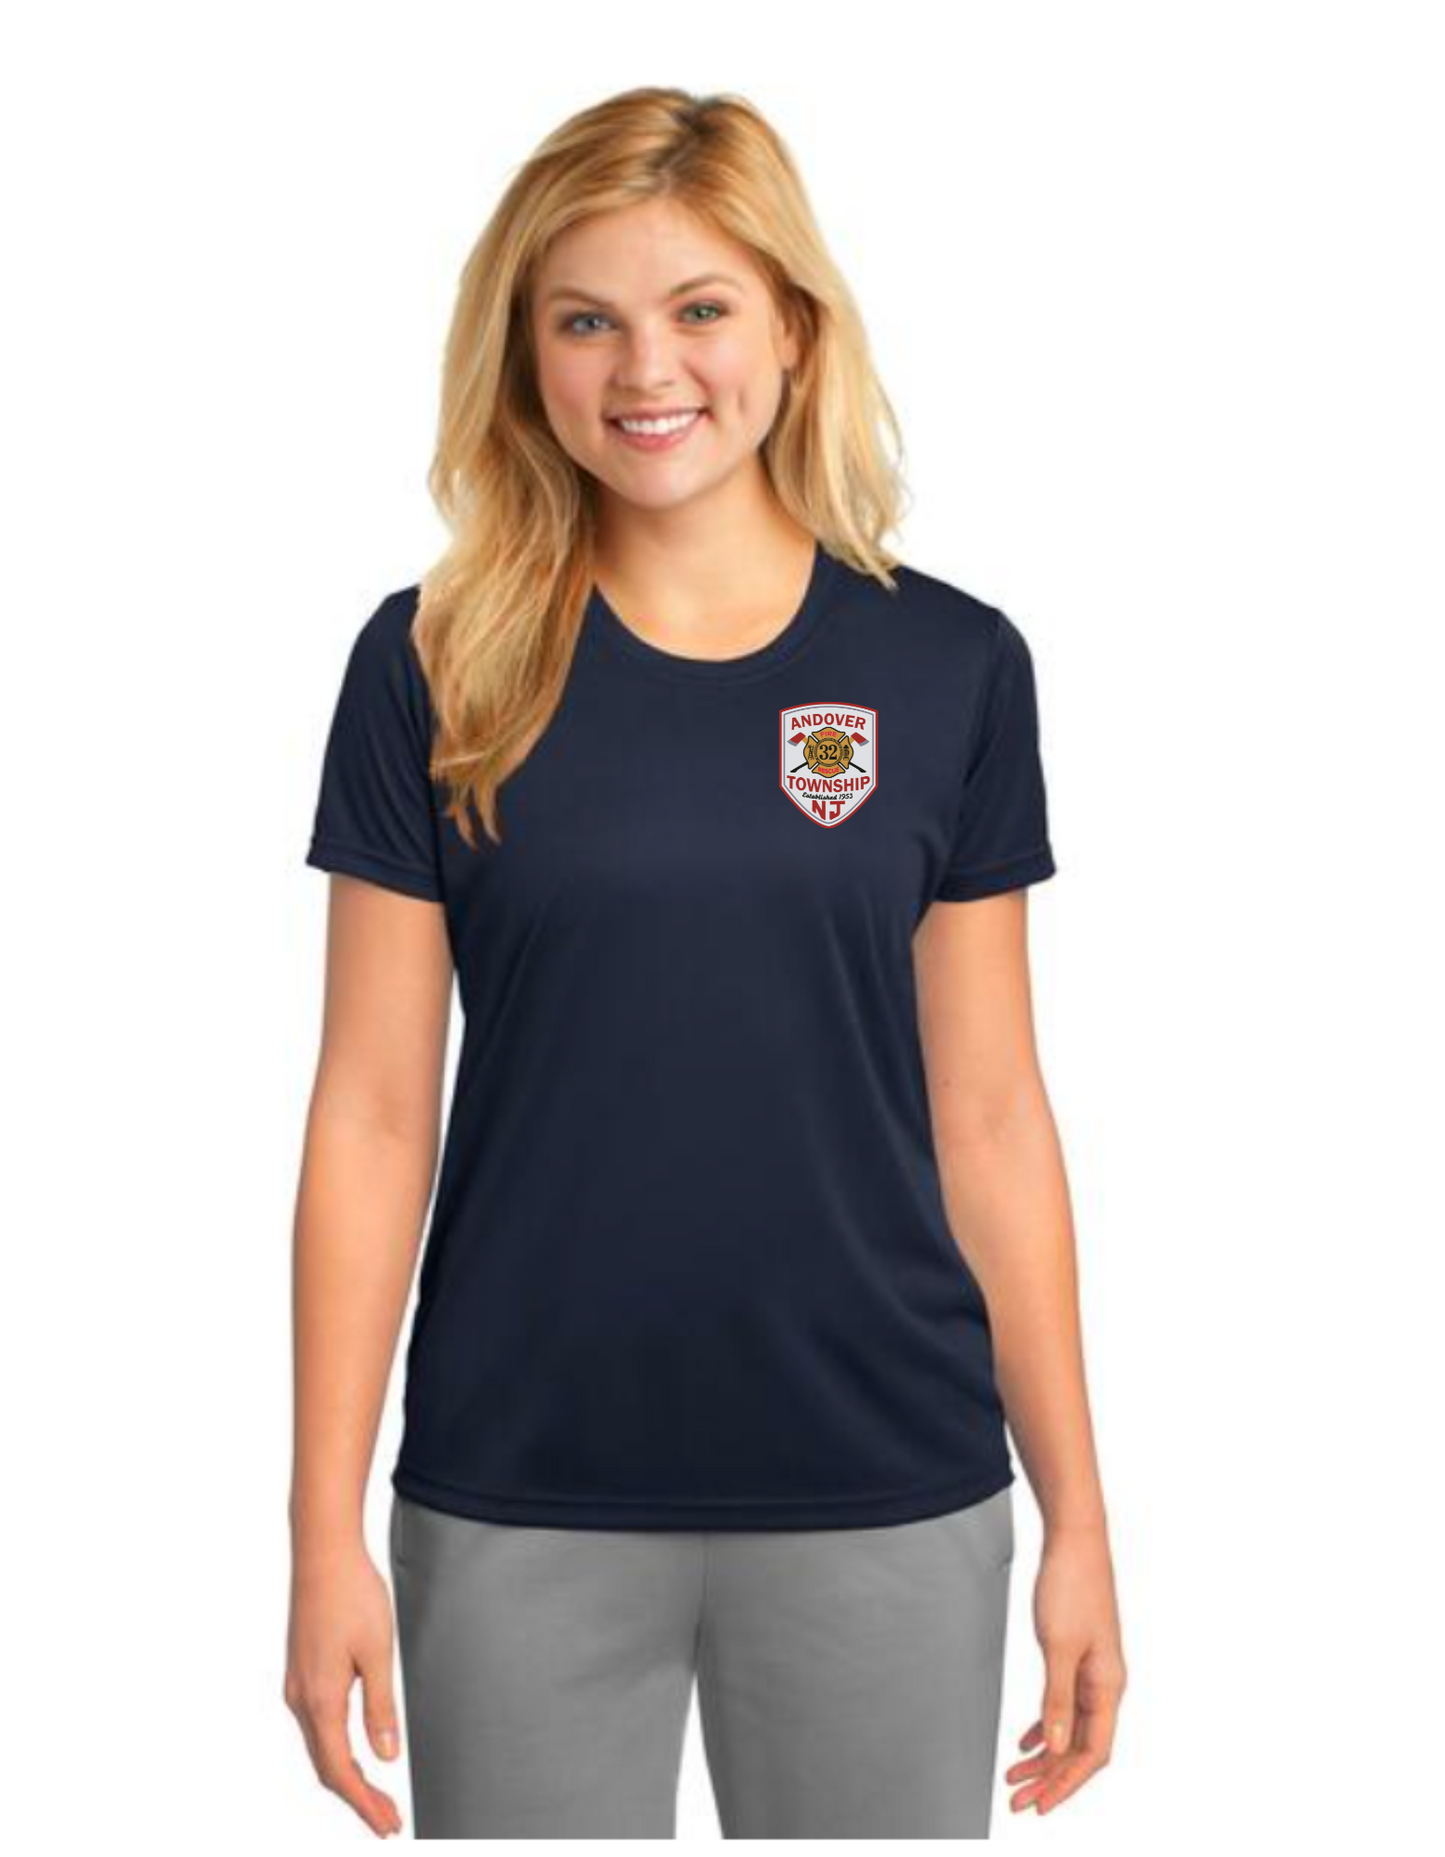 Andover Township Fire Performance Tee